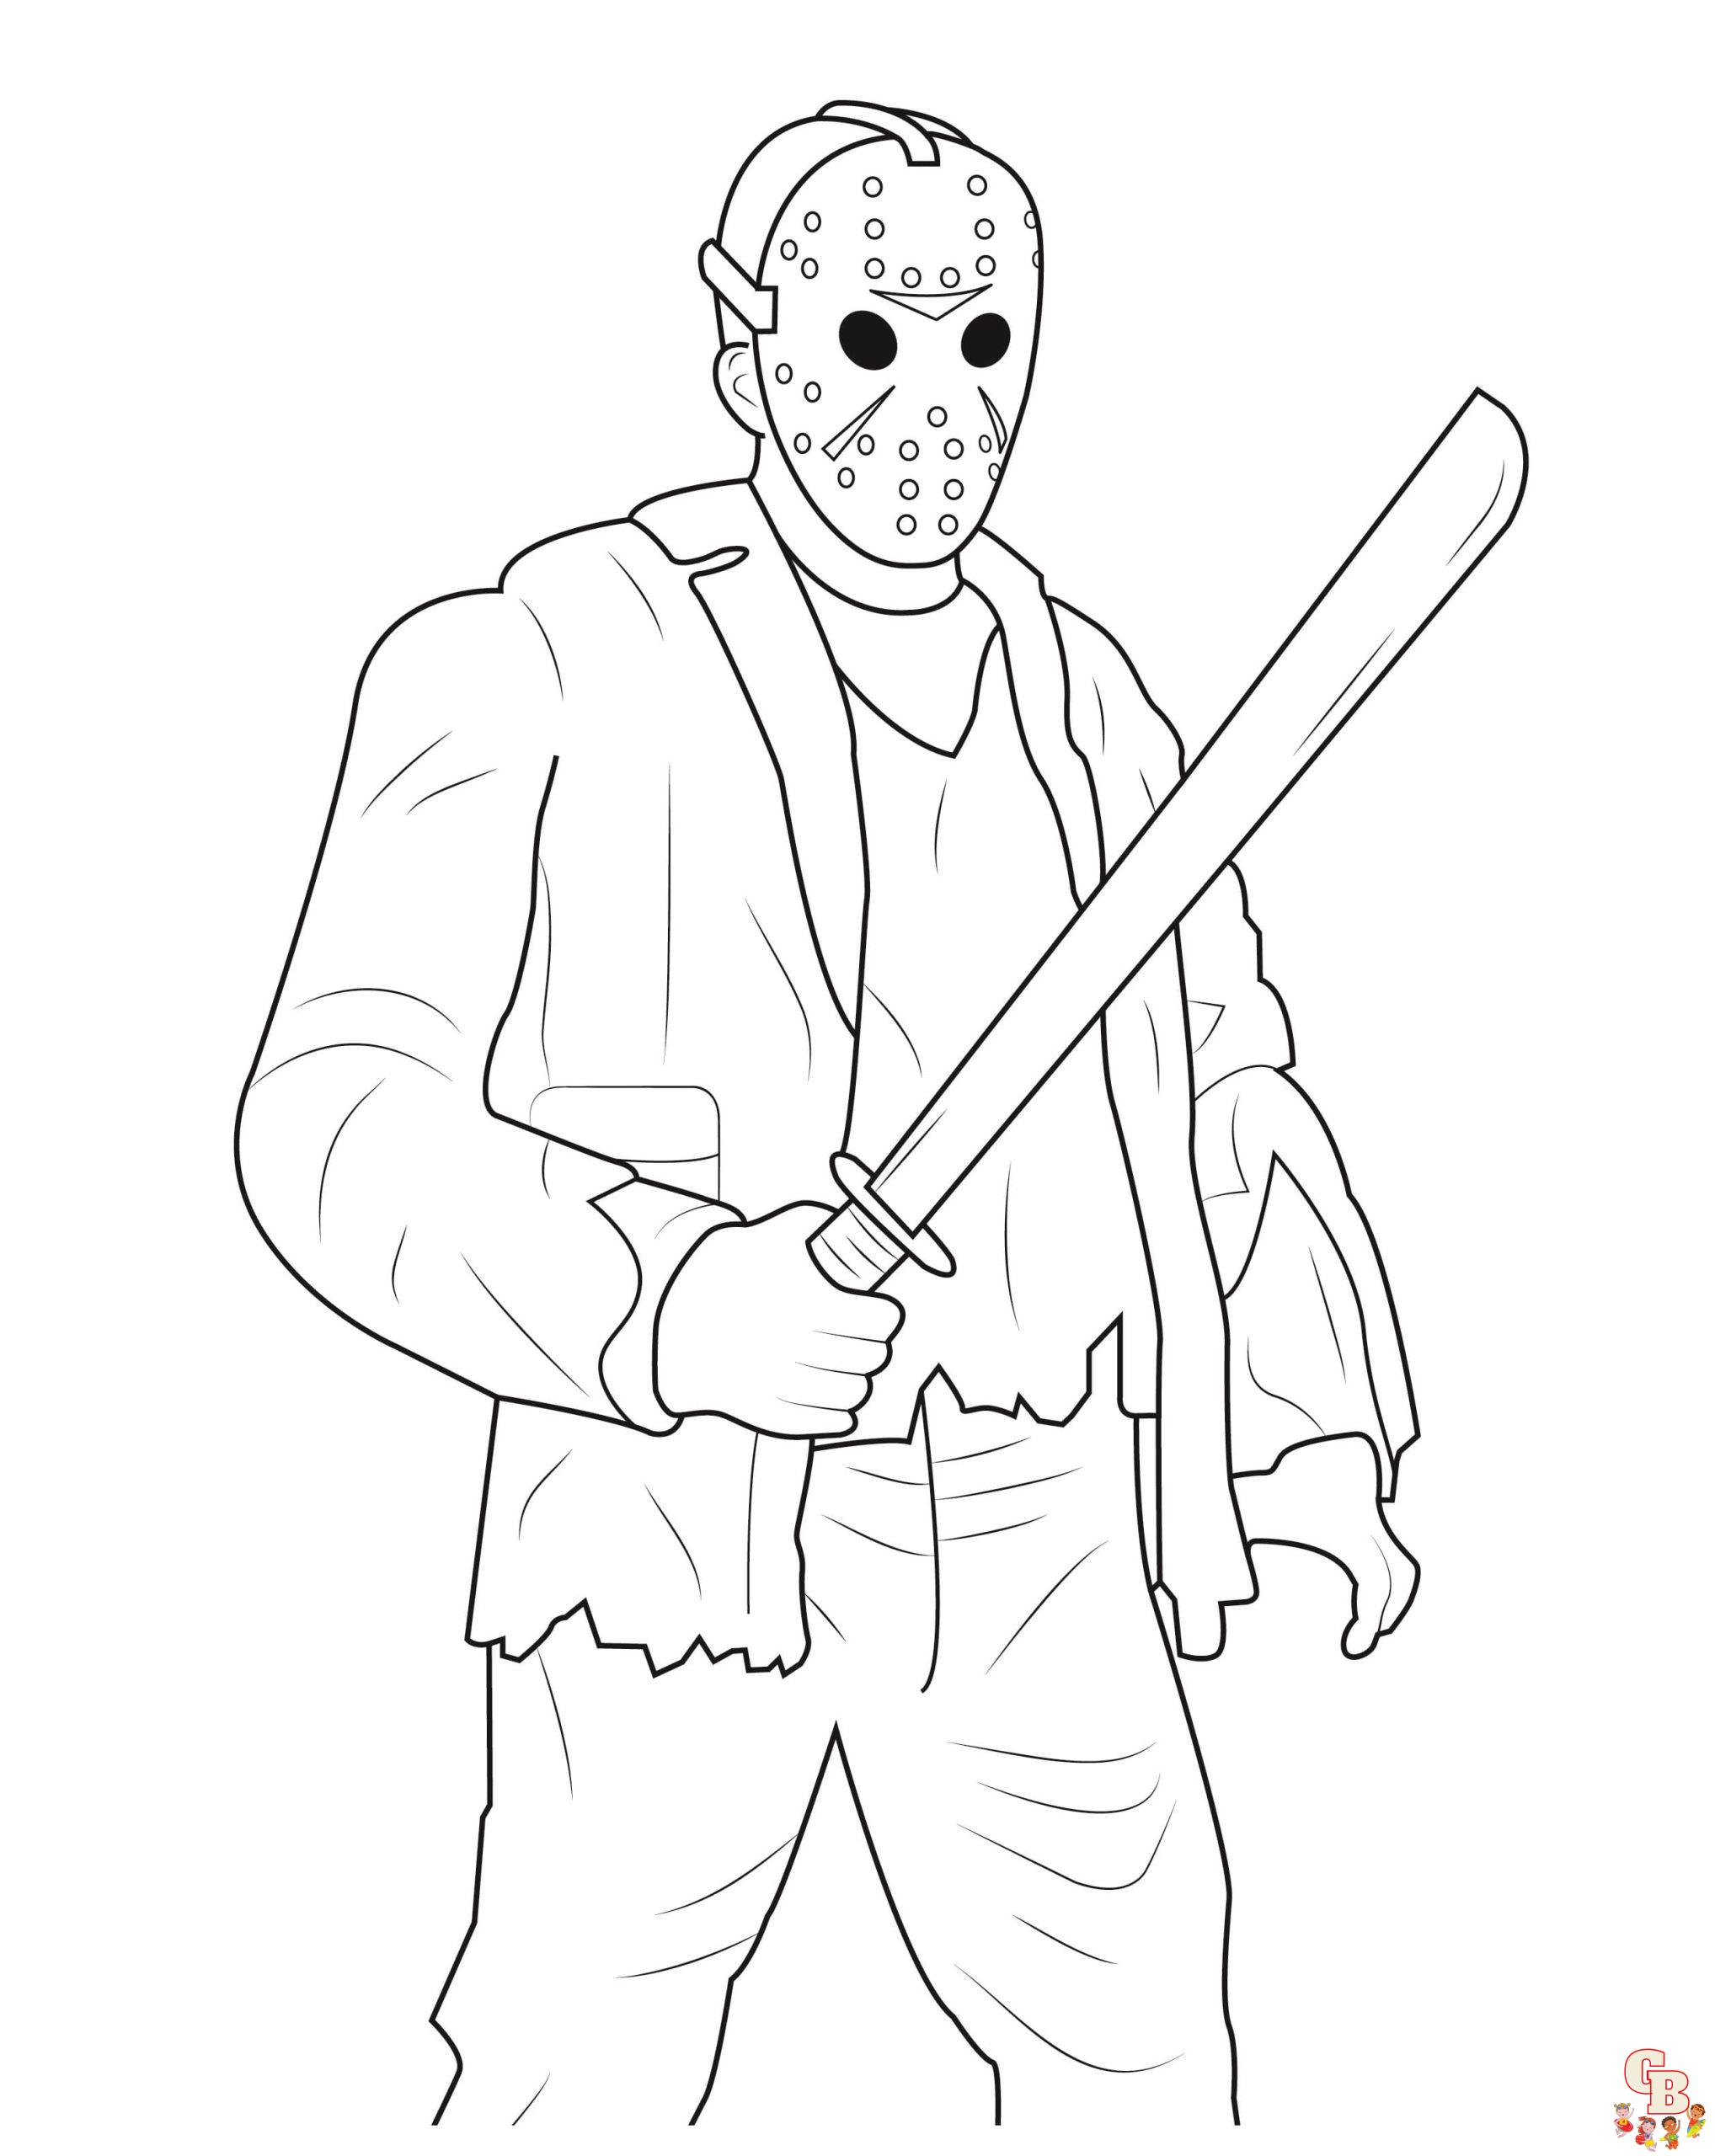 Friday the 13th coloring pages printable free